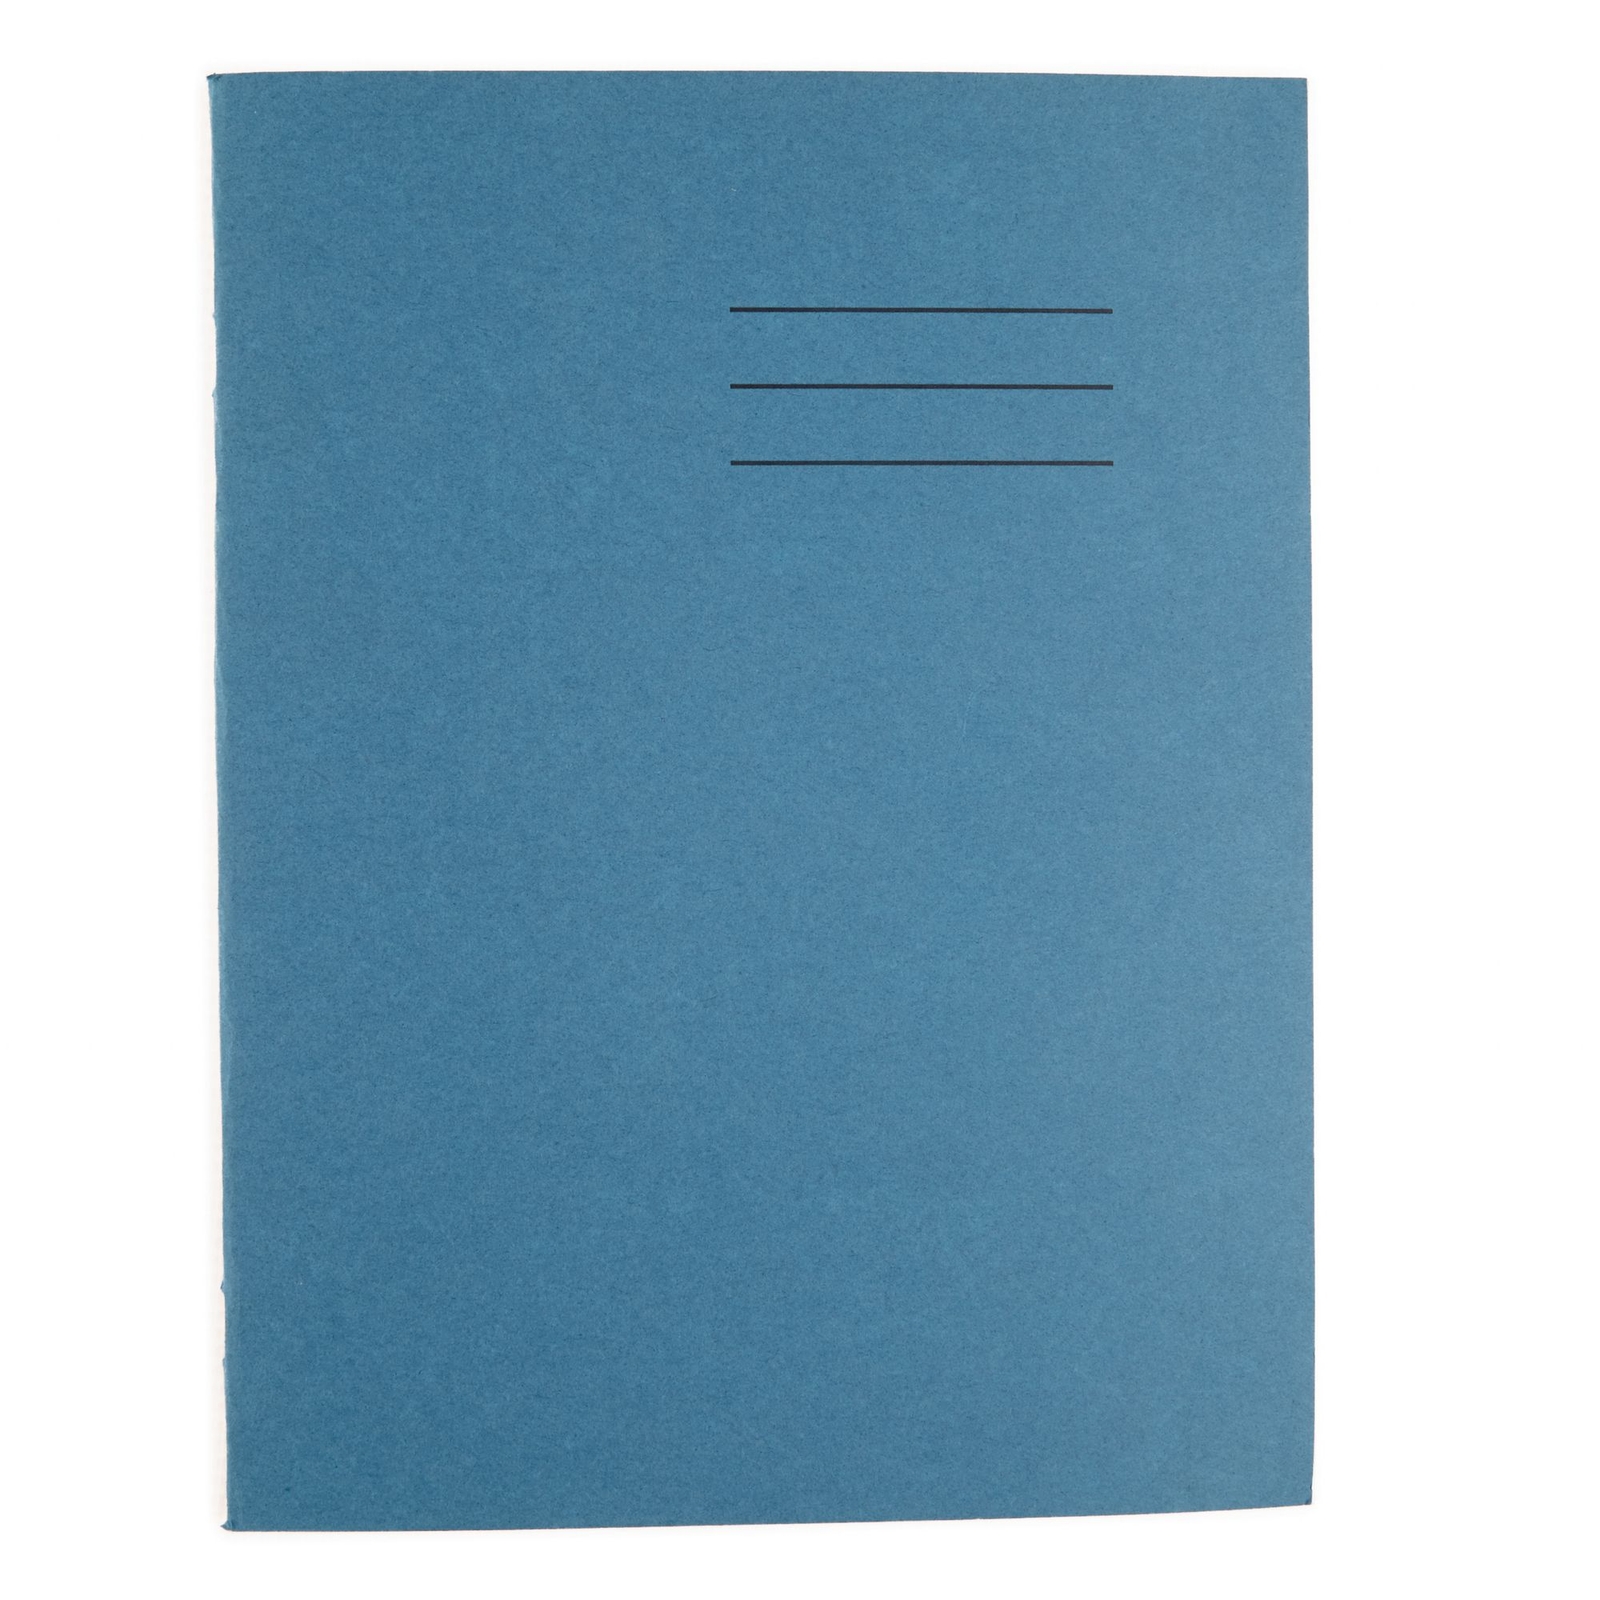 8 x 4"/200 x 120mm Regulation NB Light Blue Cover 7mm Ruled Exercise Book - 80 Page - Pack of 100